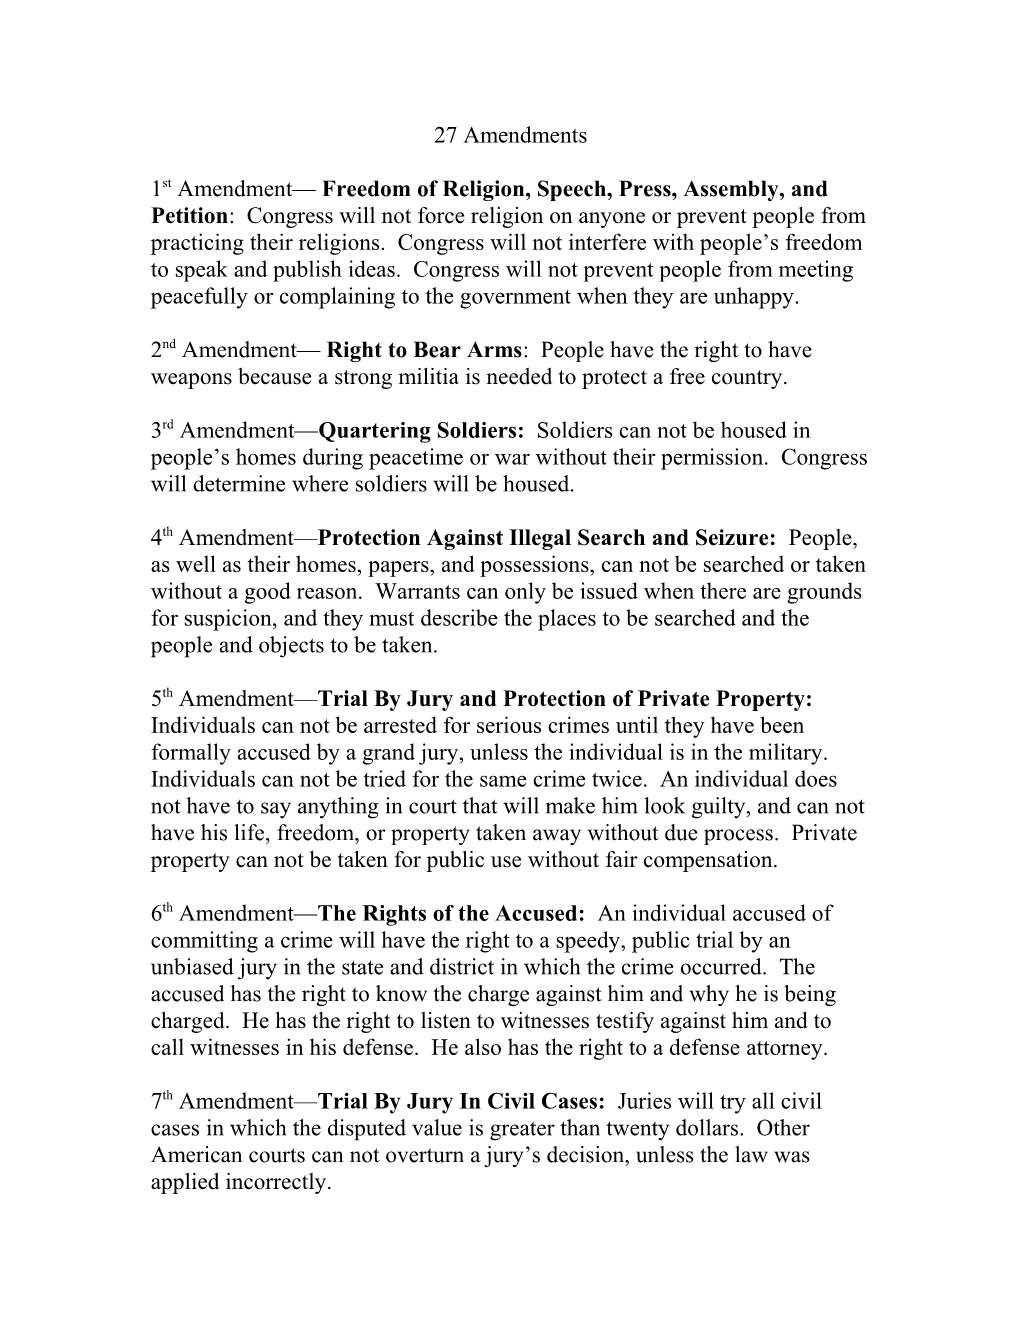 1St Amendment Freedom of Religion, Speech, Press, Assembly, and Petition : Congress Will